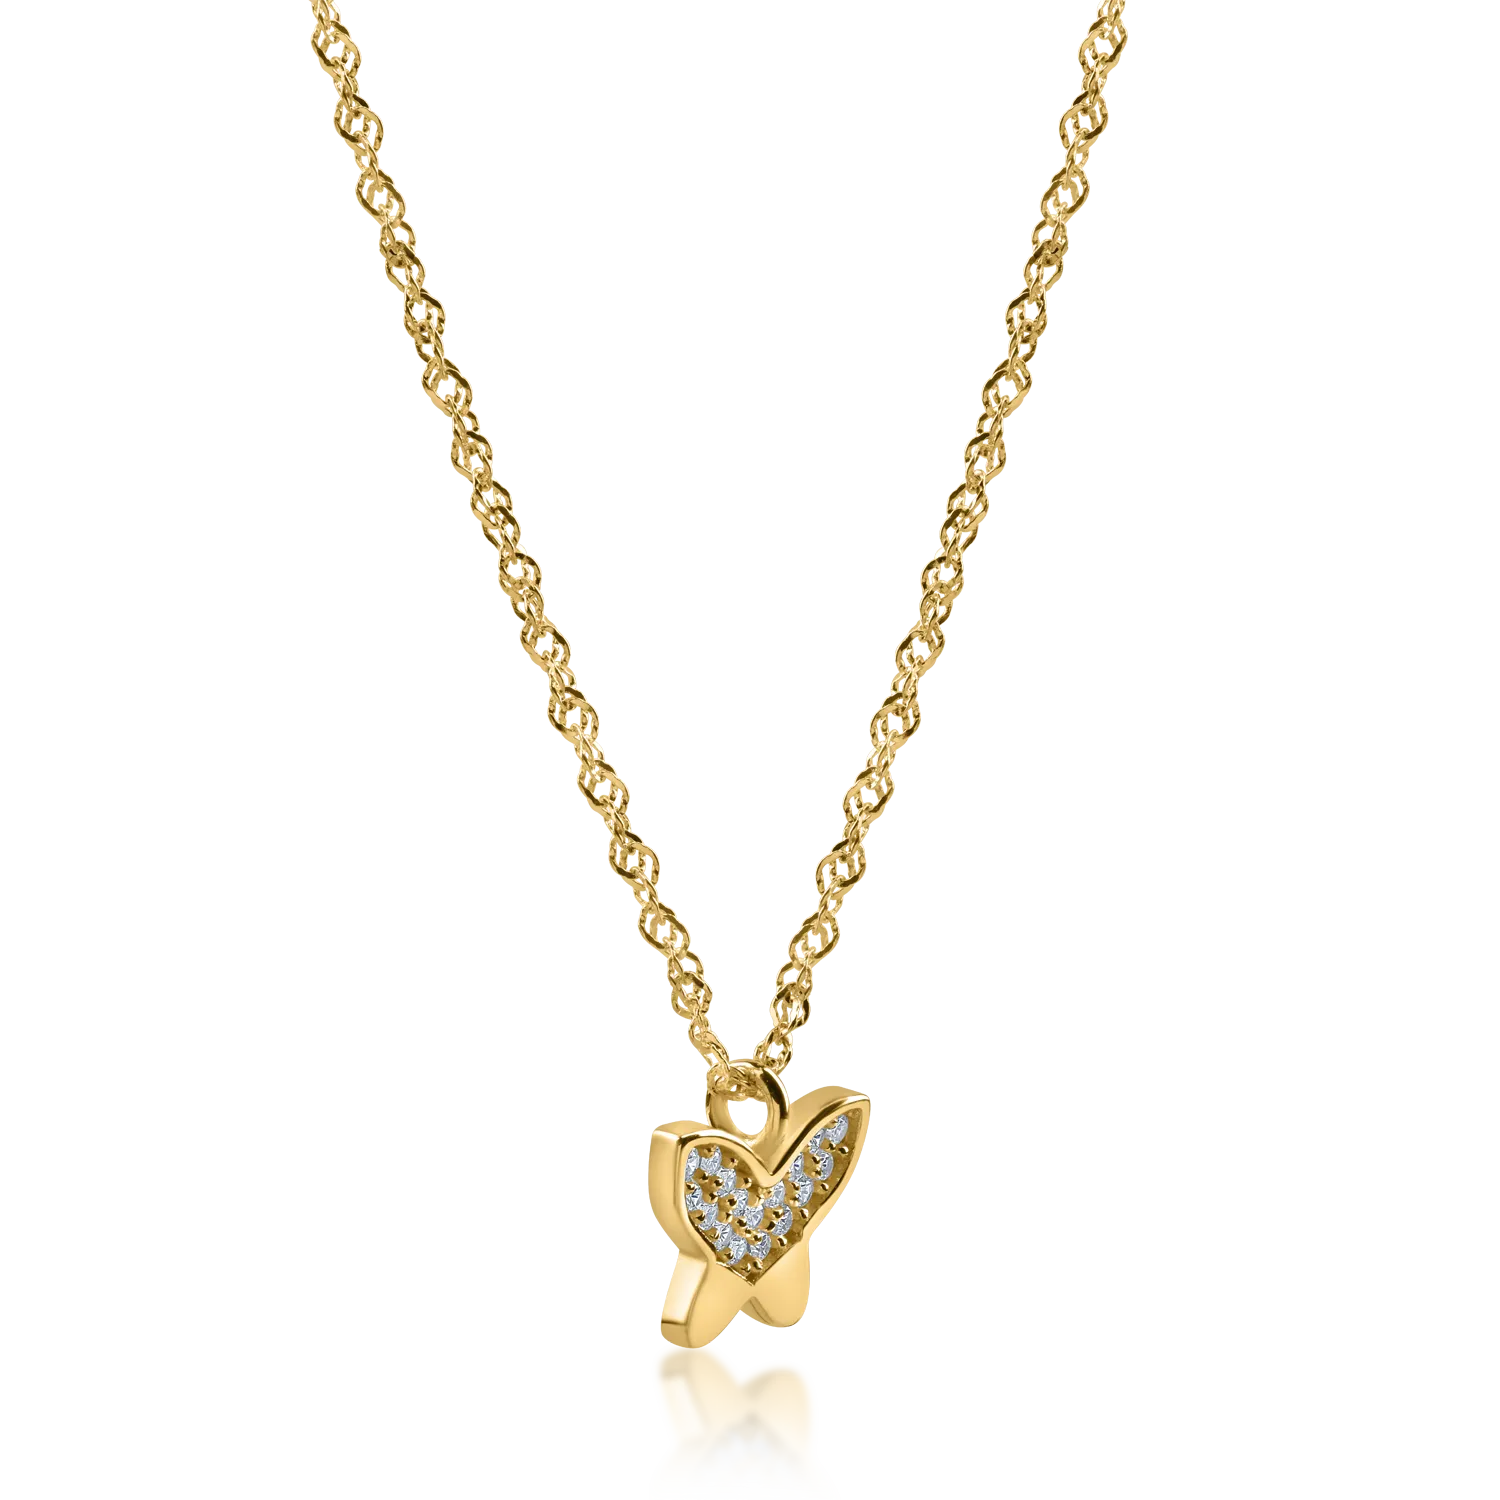 Yellow gold butterfly pendant necklace